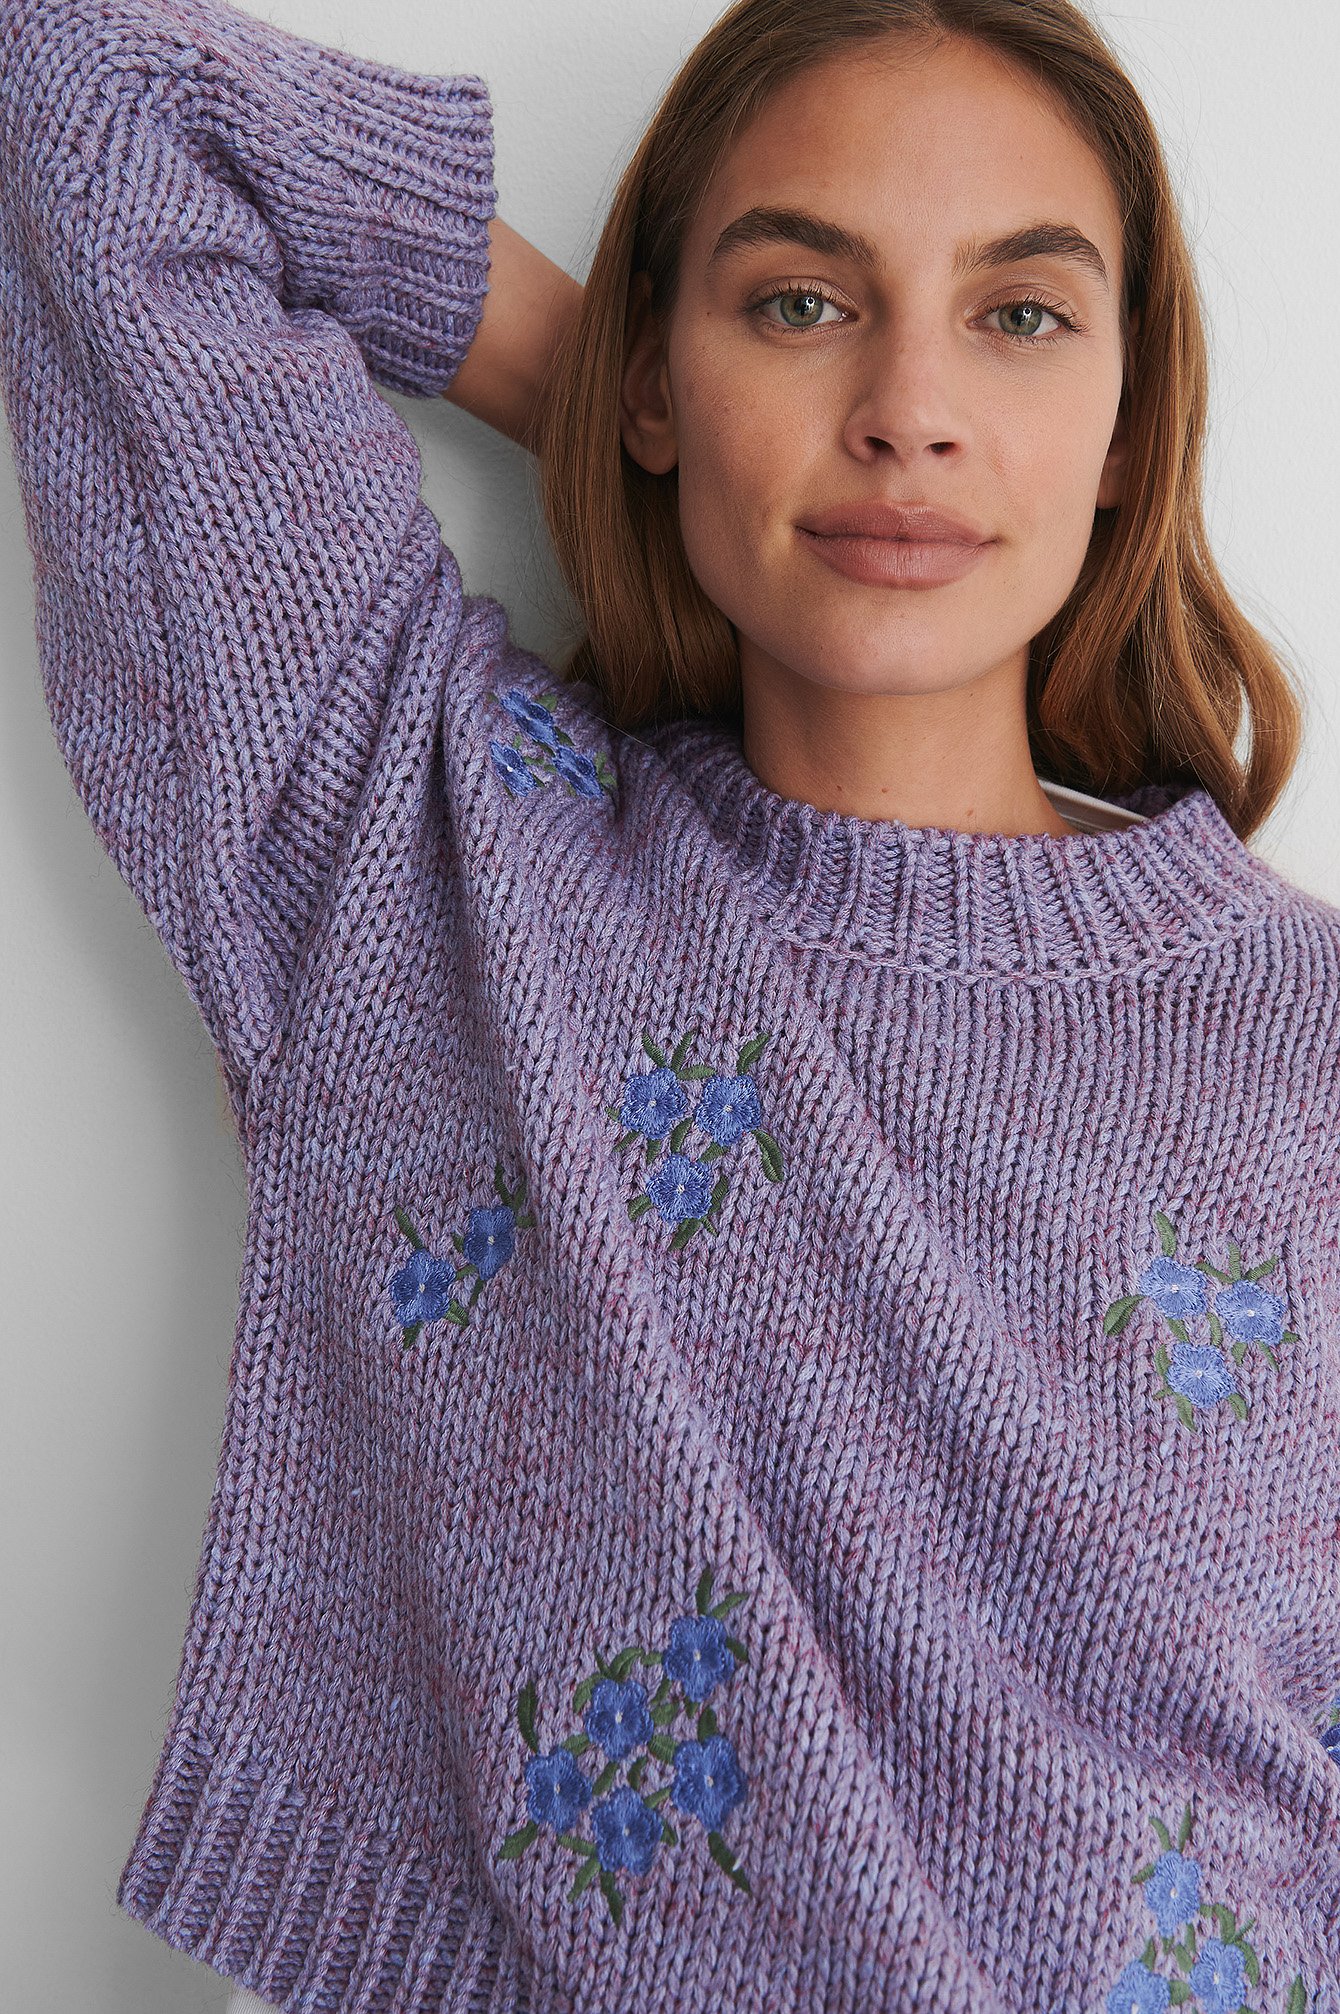 Purple Flower Embroidery Round Neck Knitted Sweater